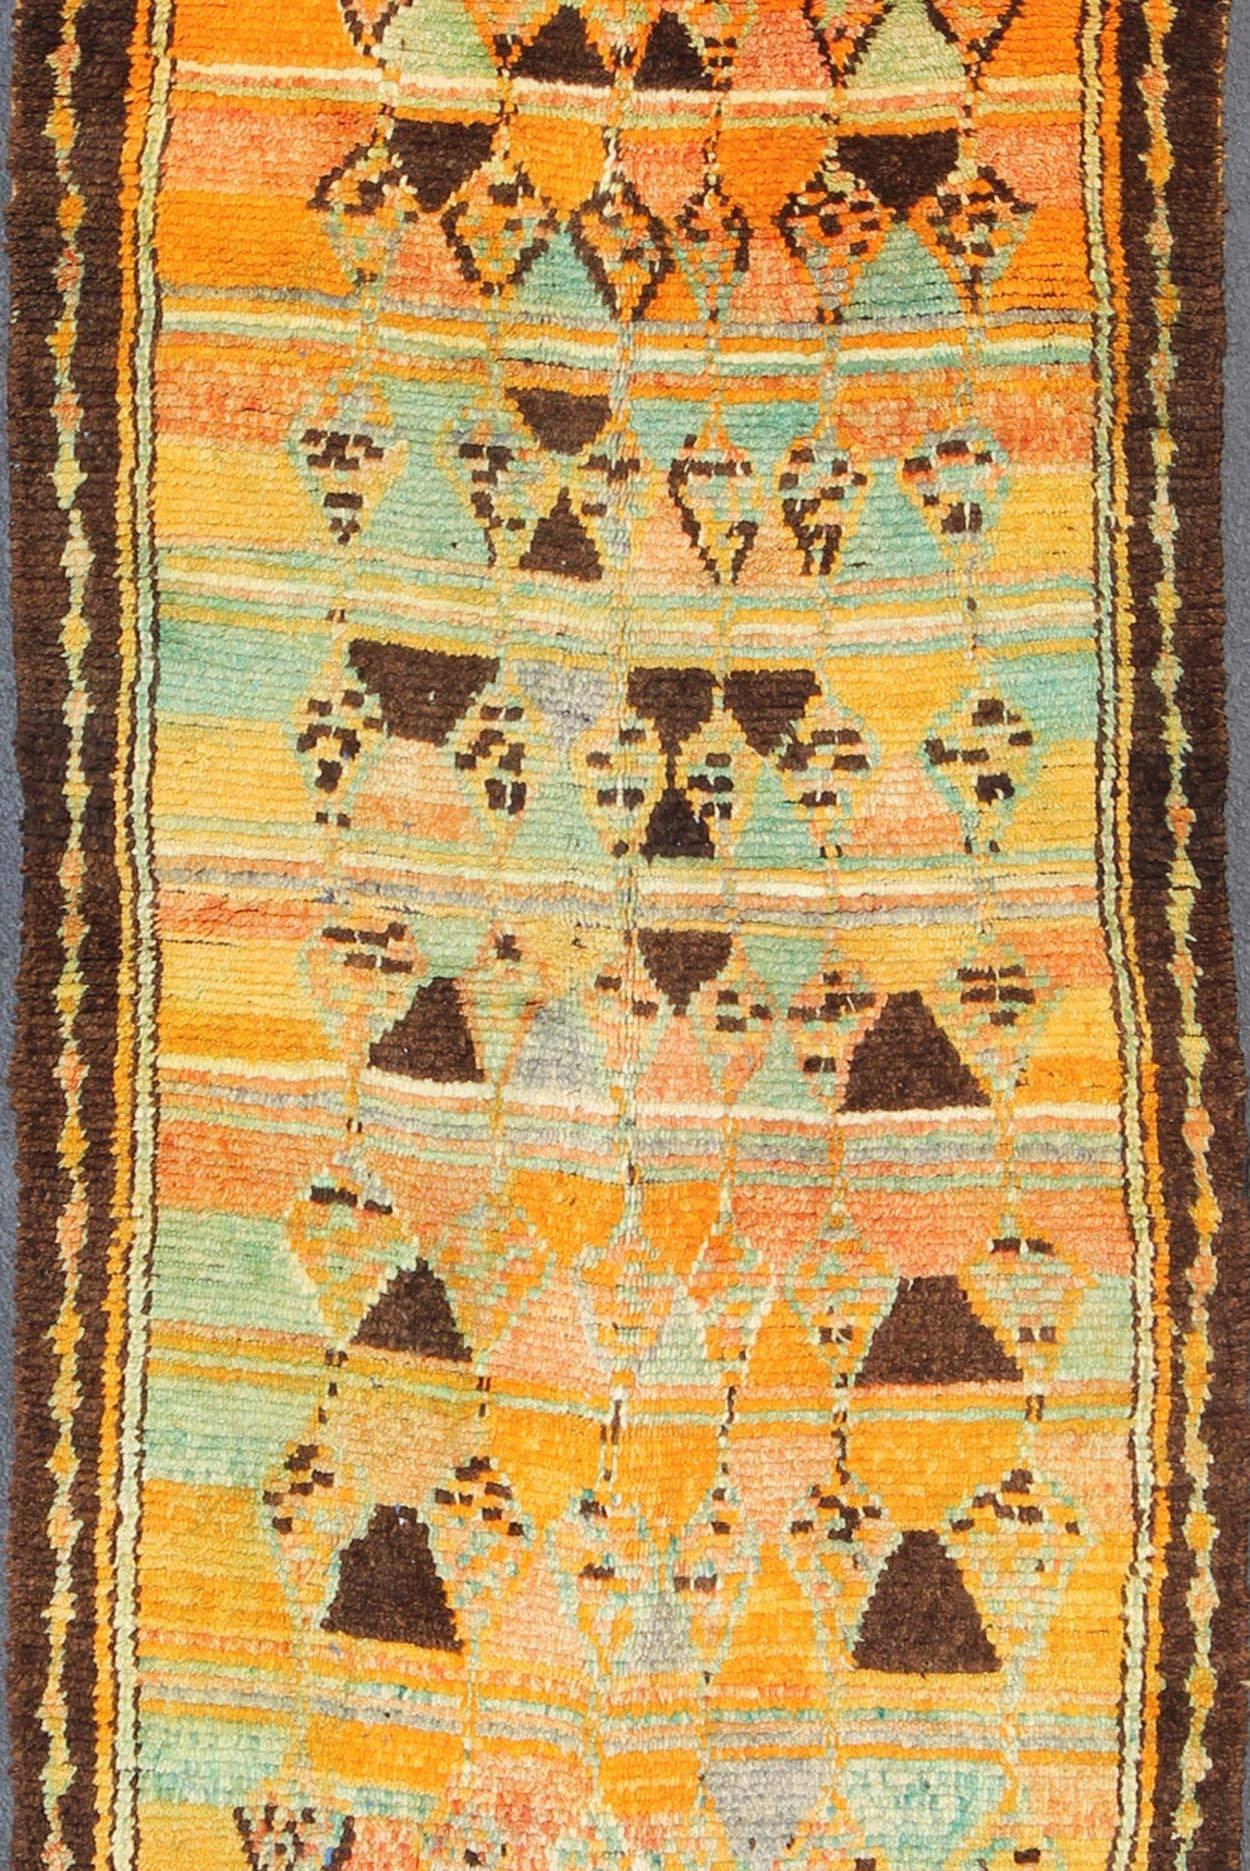 Long Vintage Moroccan Runner with Tribal Design in Orange, Brown, Blue and Green In Good Condition For Sale In Atlanta, GA